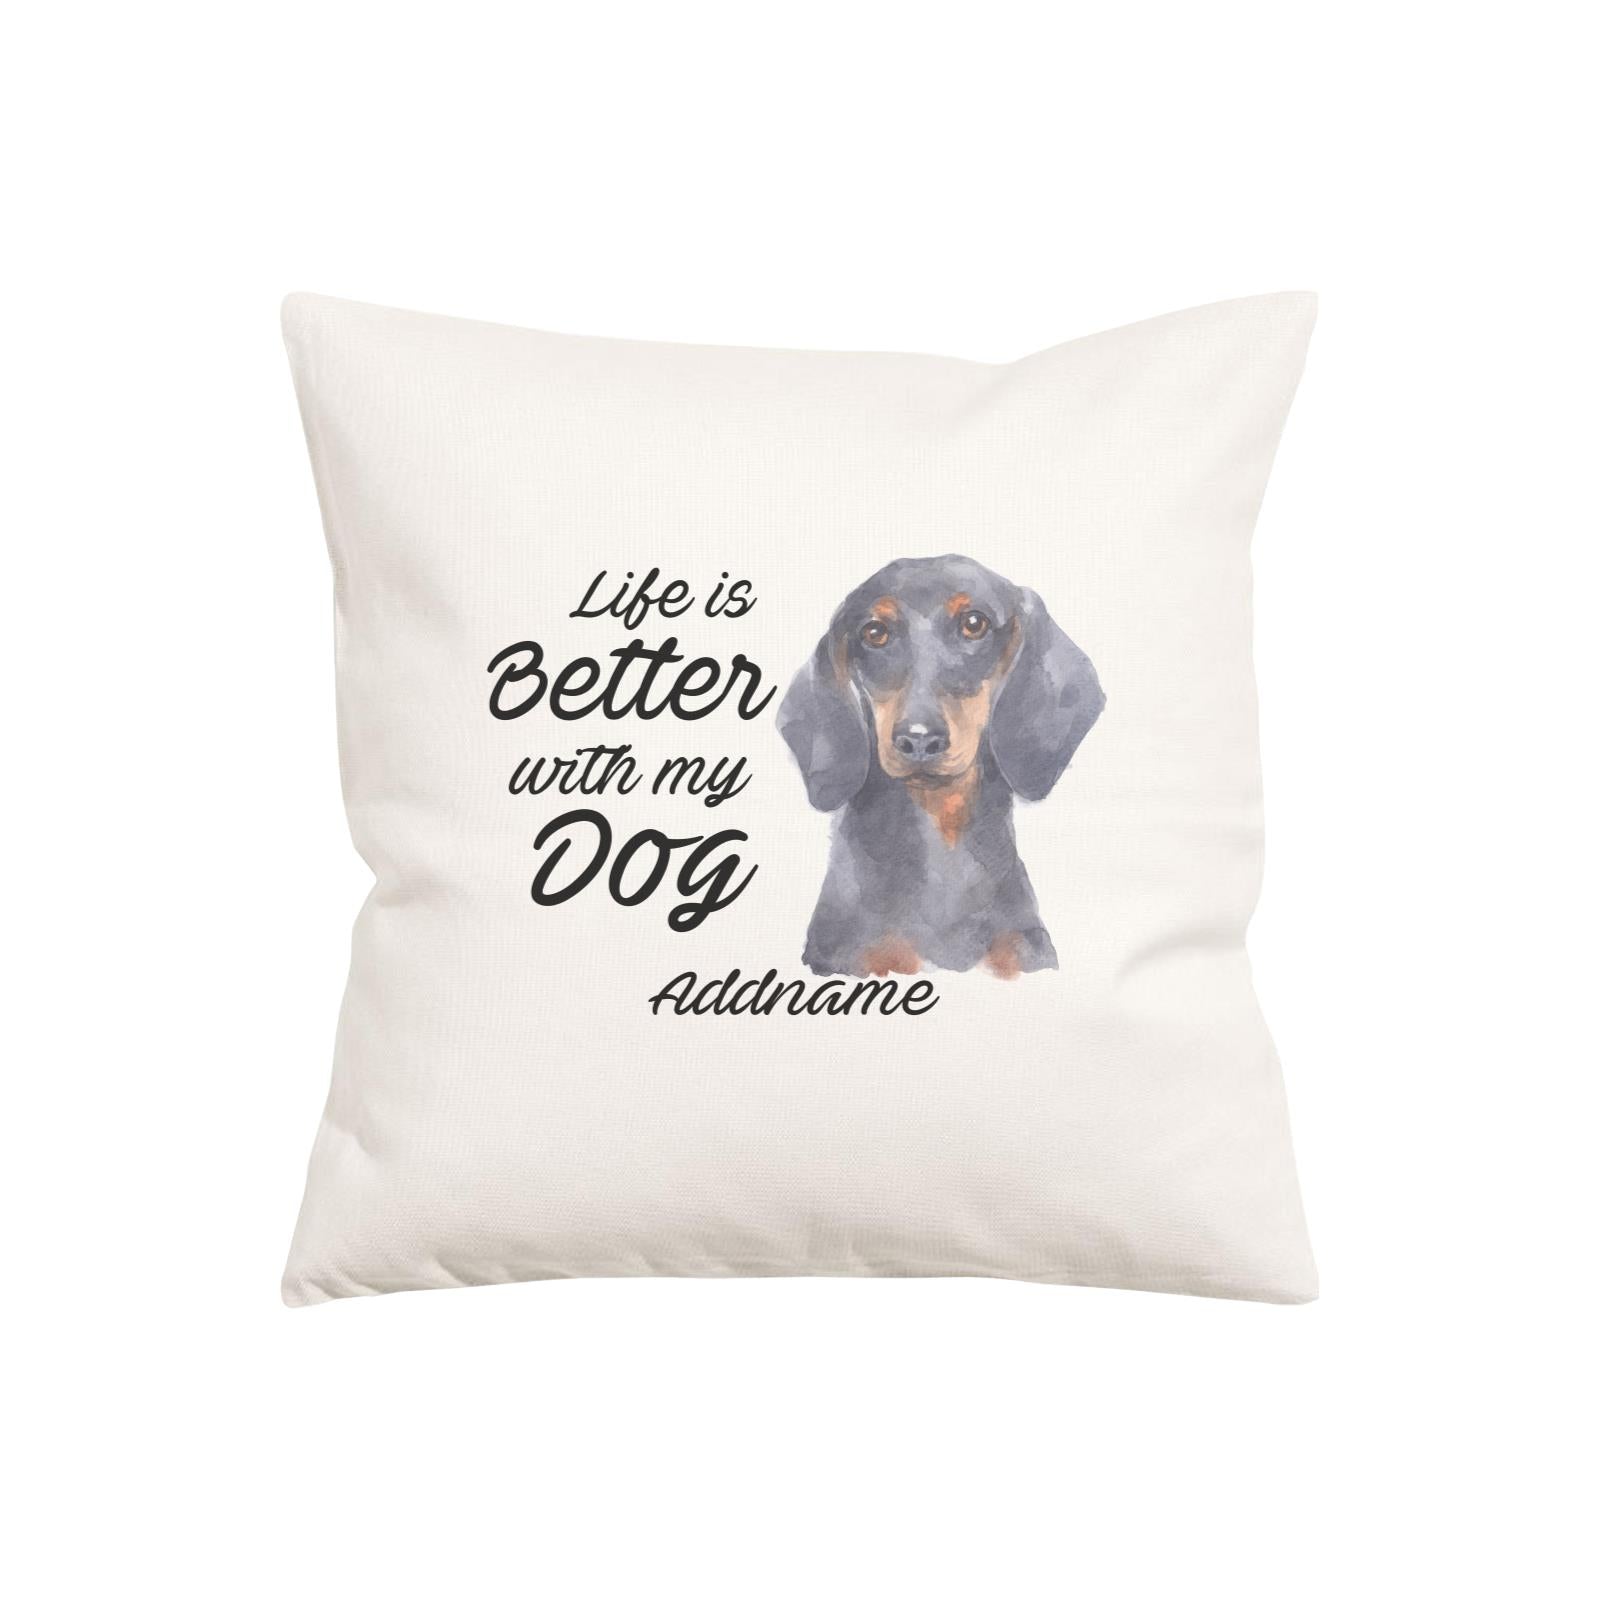 Watercolor Life is Better With My Dog Dachshund Addname Pillow Cushion